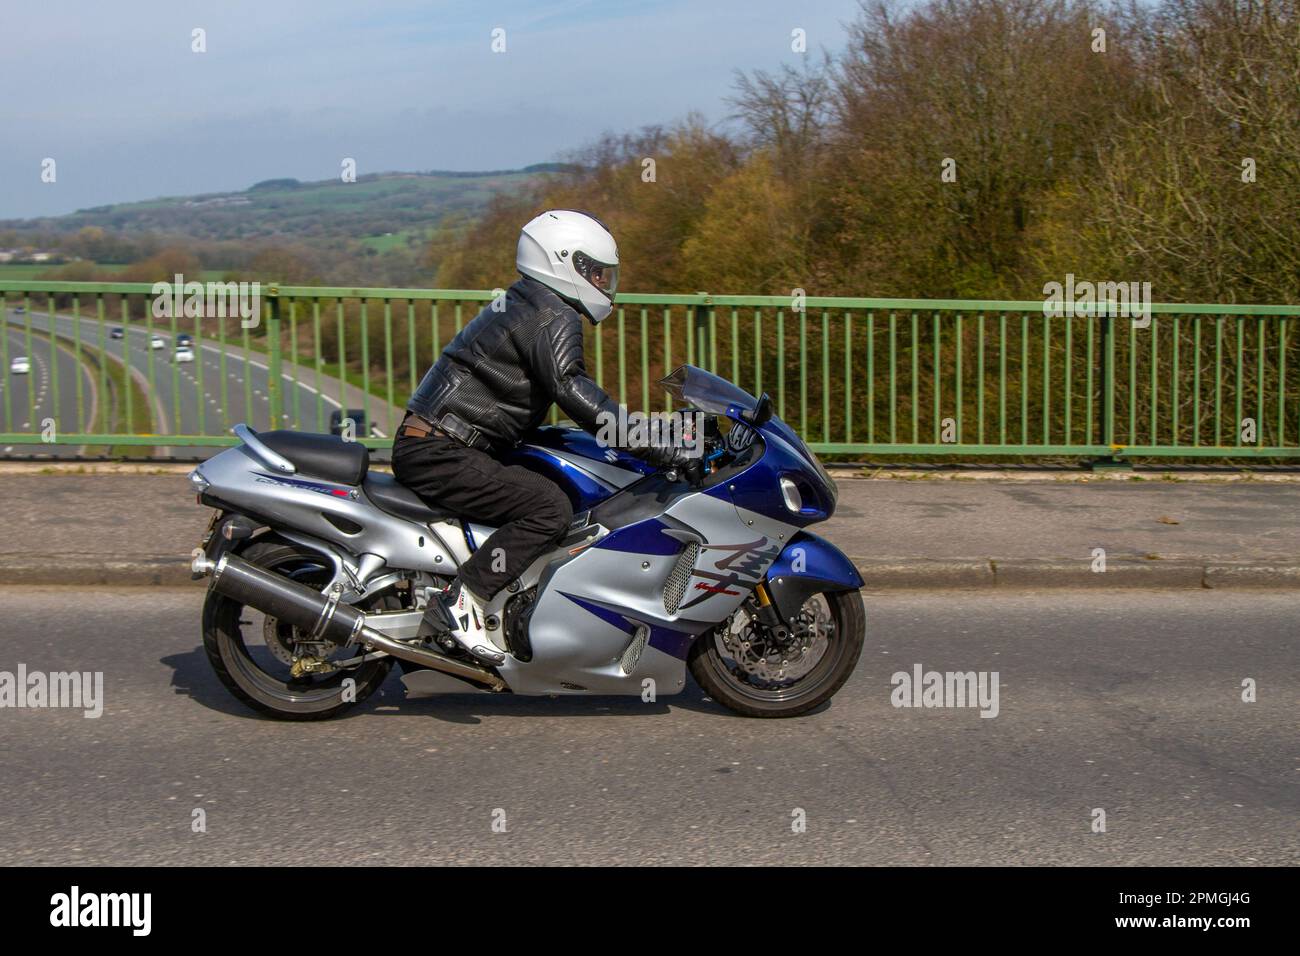 2005 SUZUKI Gsx 1300 RS inline Four Blue motorcycle Supersports 1299cc Petrol; crossing M61 motorway bridge in Greater Manchester, UK Stock Photo